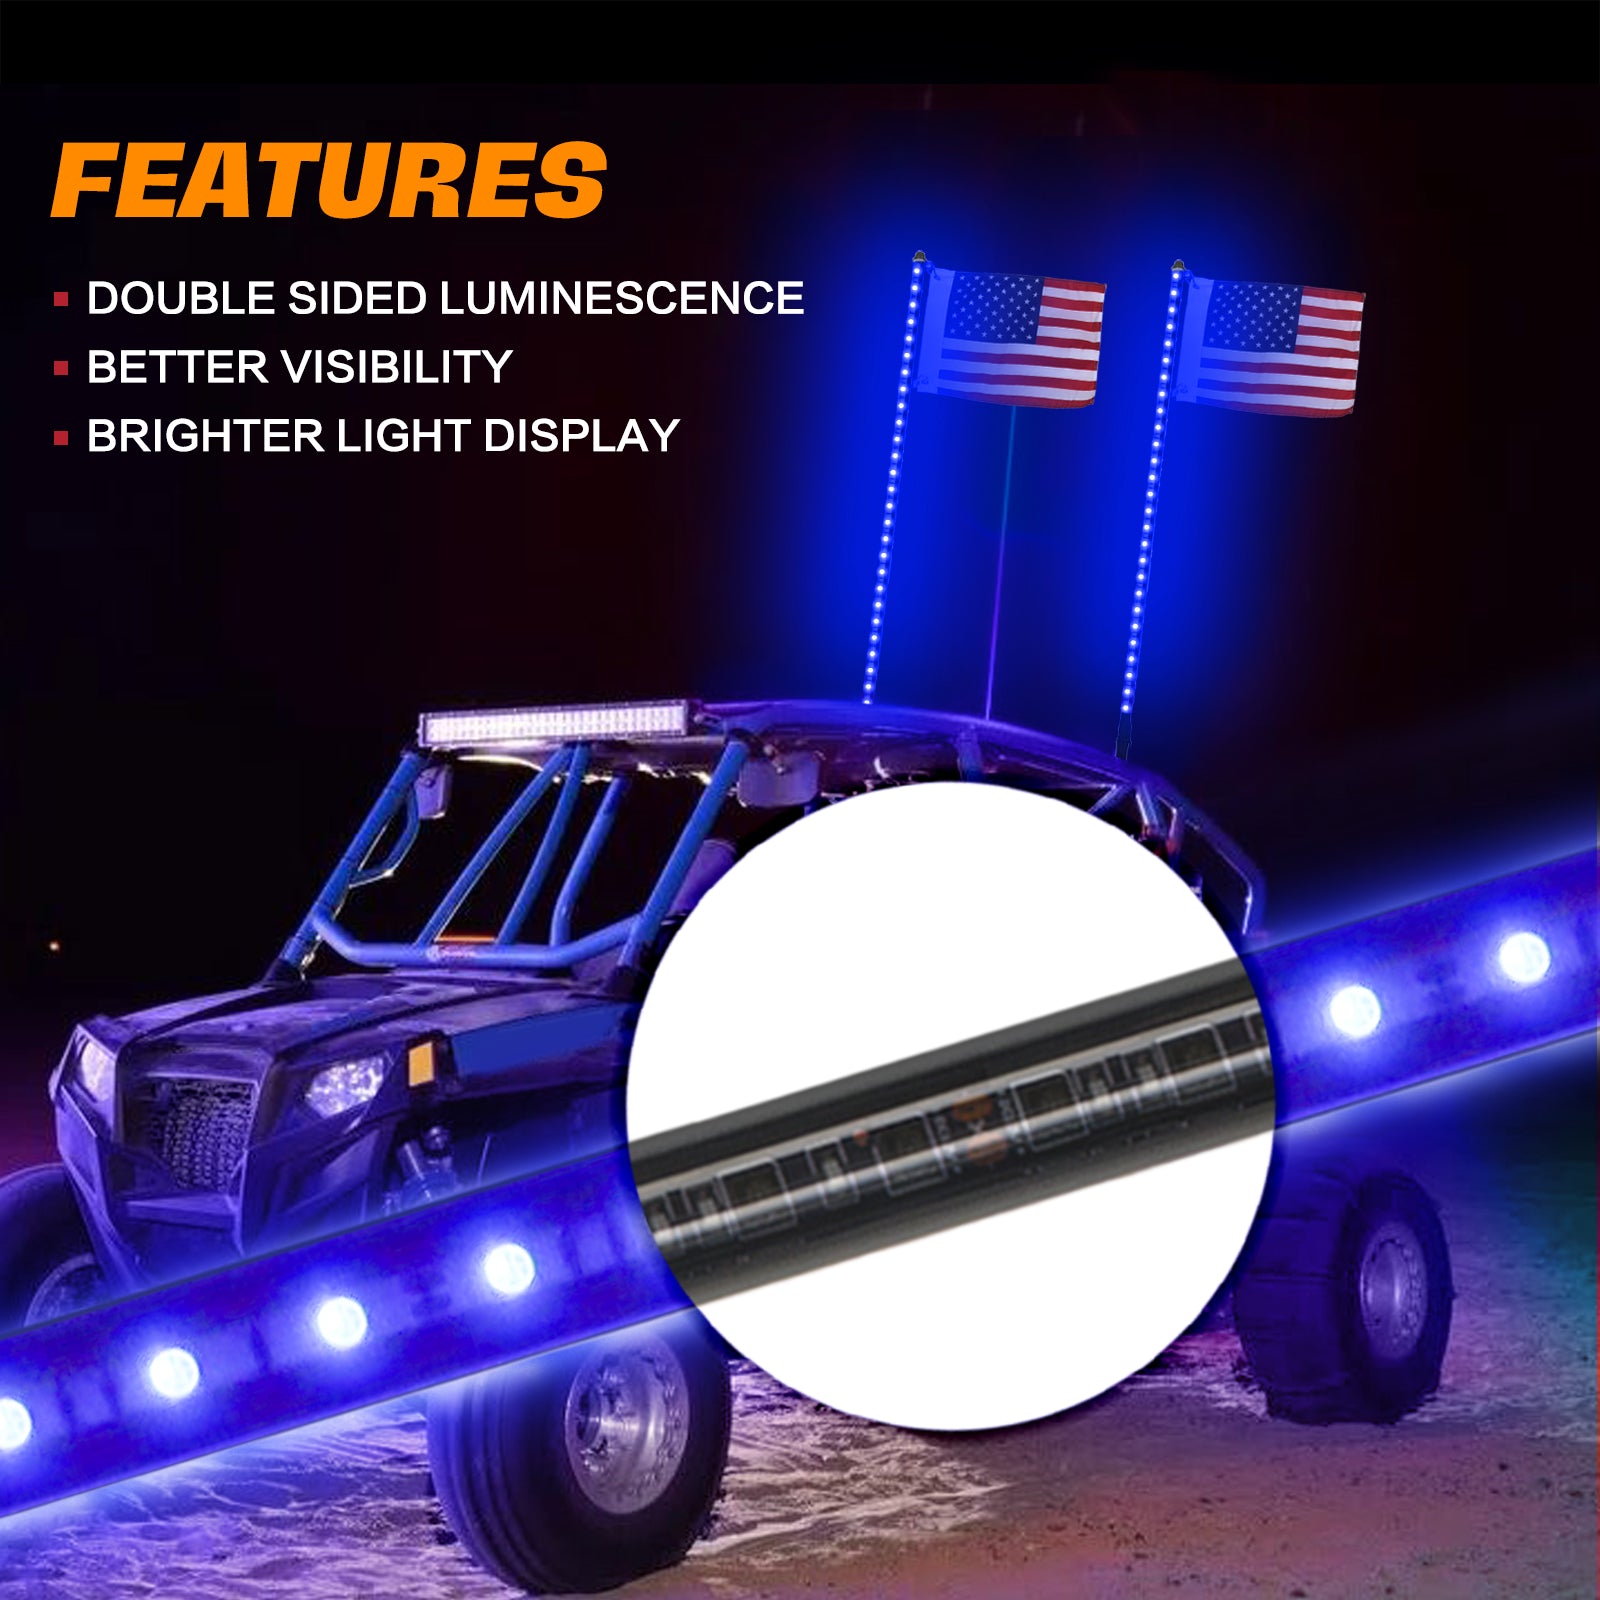 3ft LED Whip Blue Lights Waterproof Flag Pole Safety Antenna with Flag for Can Am Maverick X3 Sand Dune Buggy UTV ATV 2020 Polaris RZR XP 4X4 Offroad Truck 4 Wheels - 1PCS